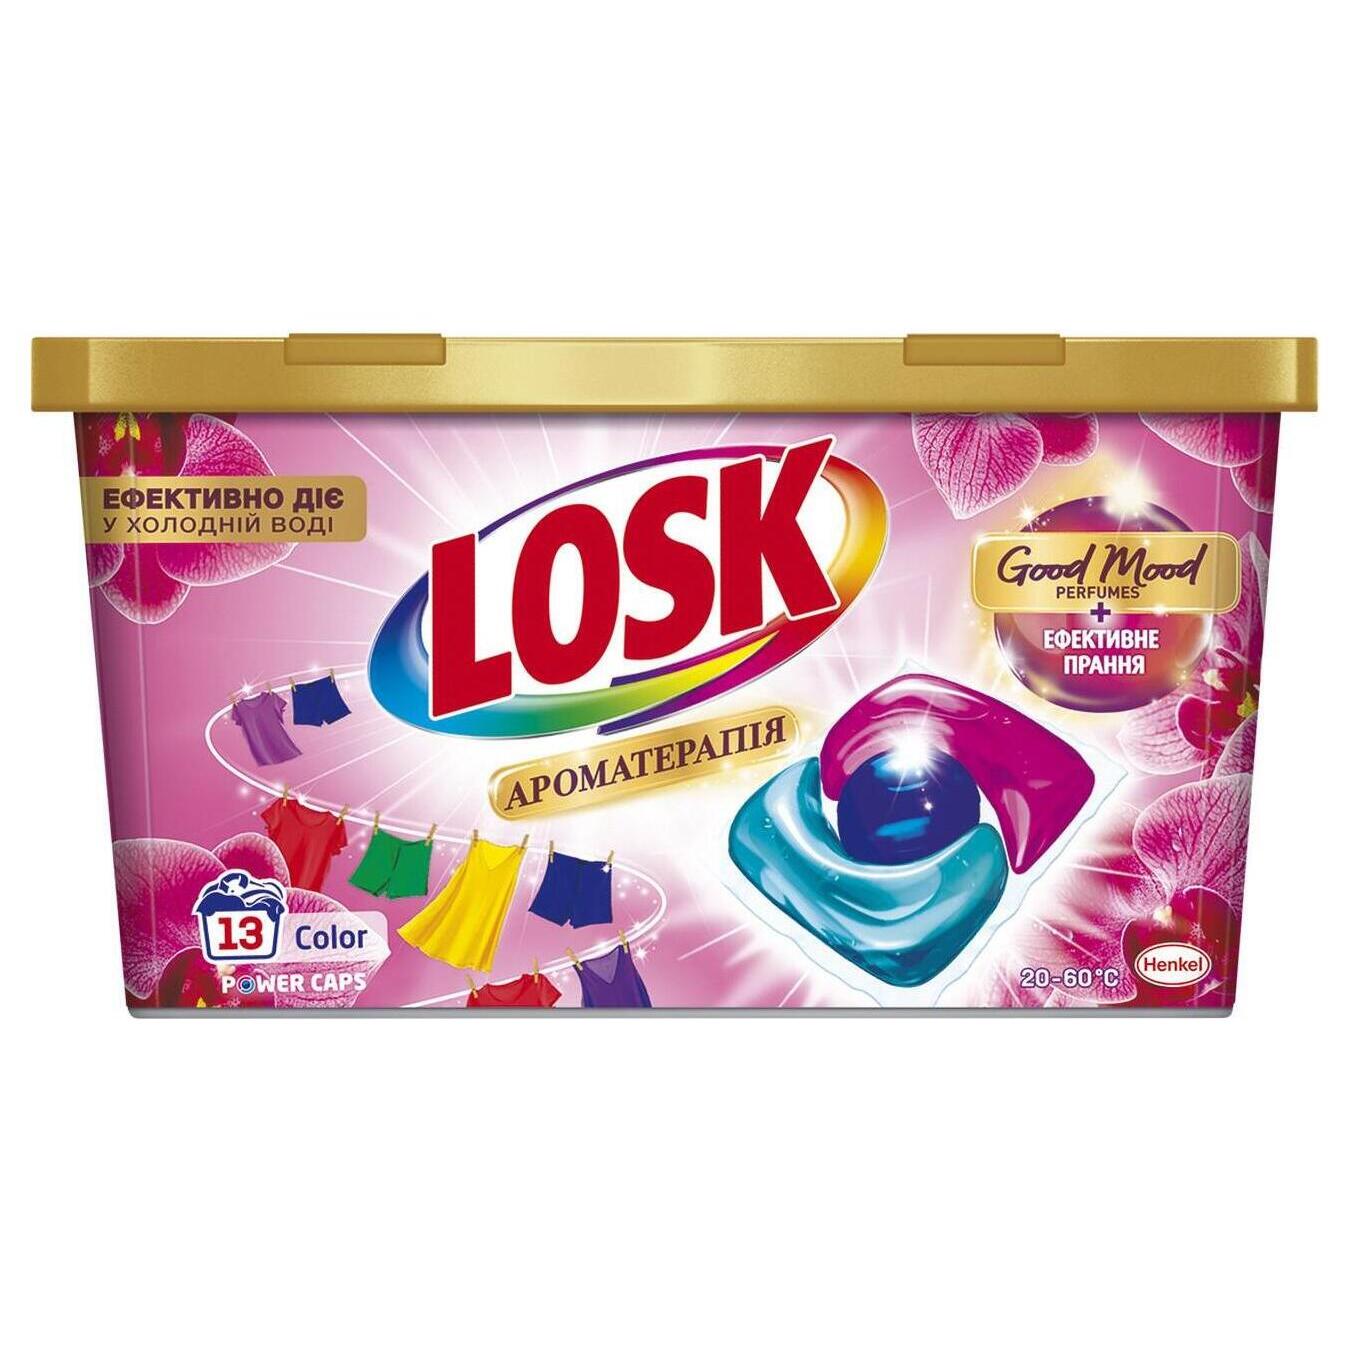 Capsules for washing Losk trio-capsules JSC Essential oils and aroma Malaysian flower 13 pcs.